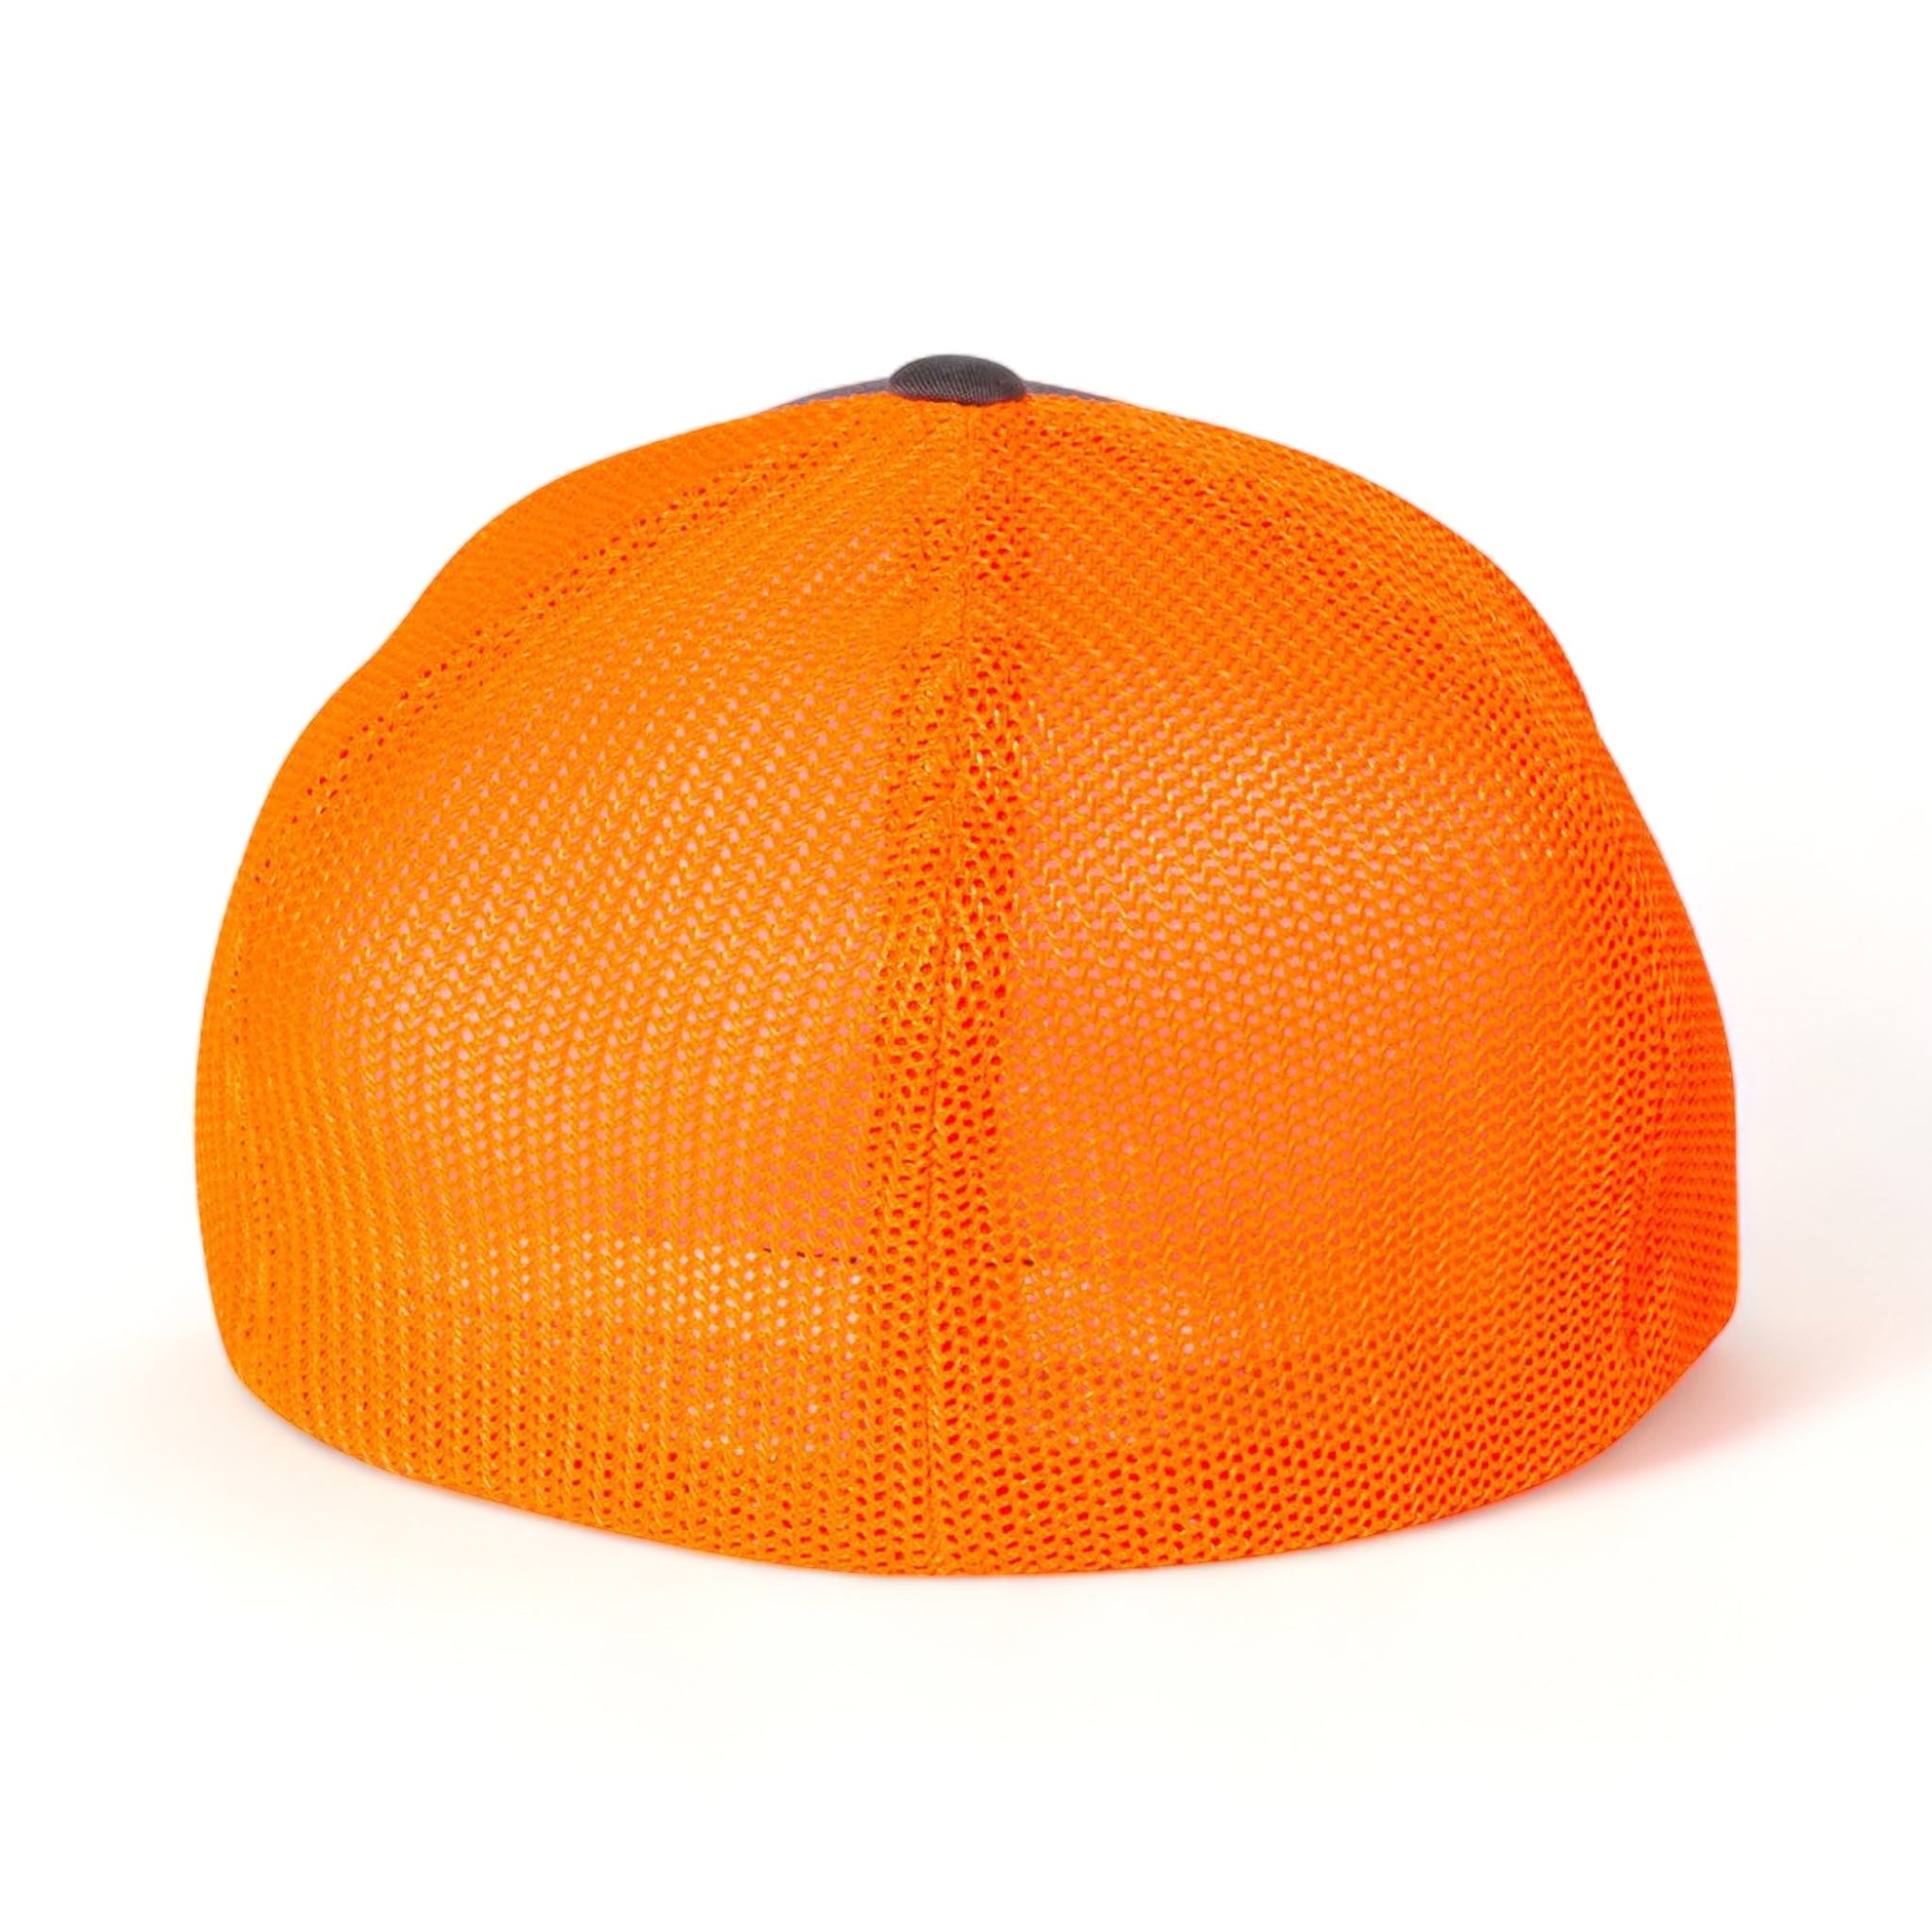 Back view of Flexfit 6511 custom hat in charcoal and neon orange